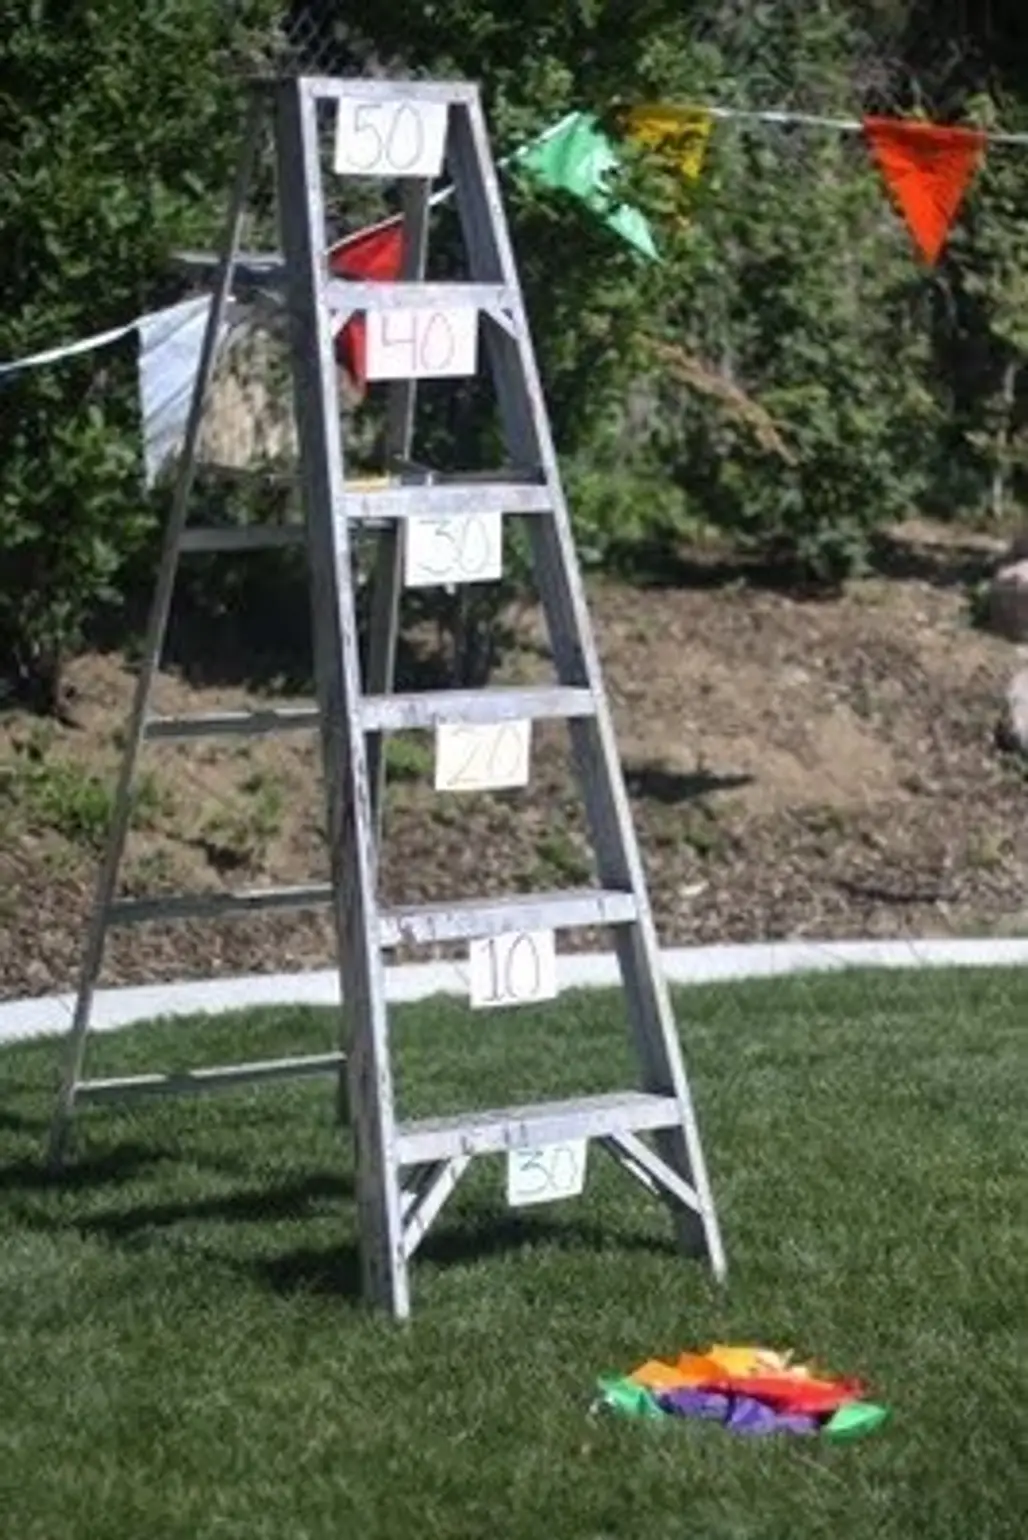 ladder,play,outdoor play equipment,tool,outdoor structure,